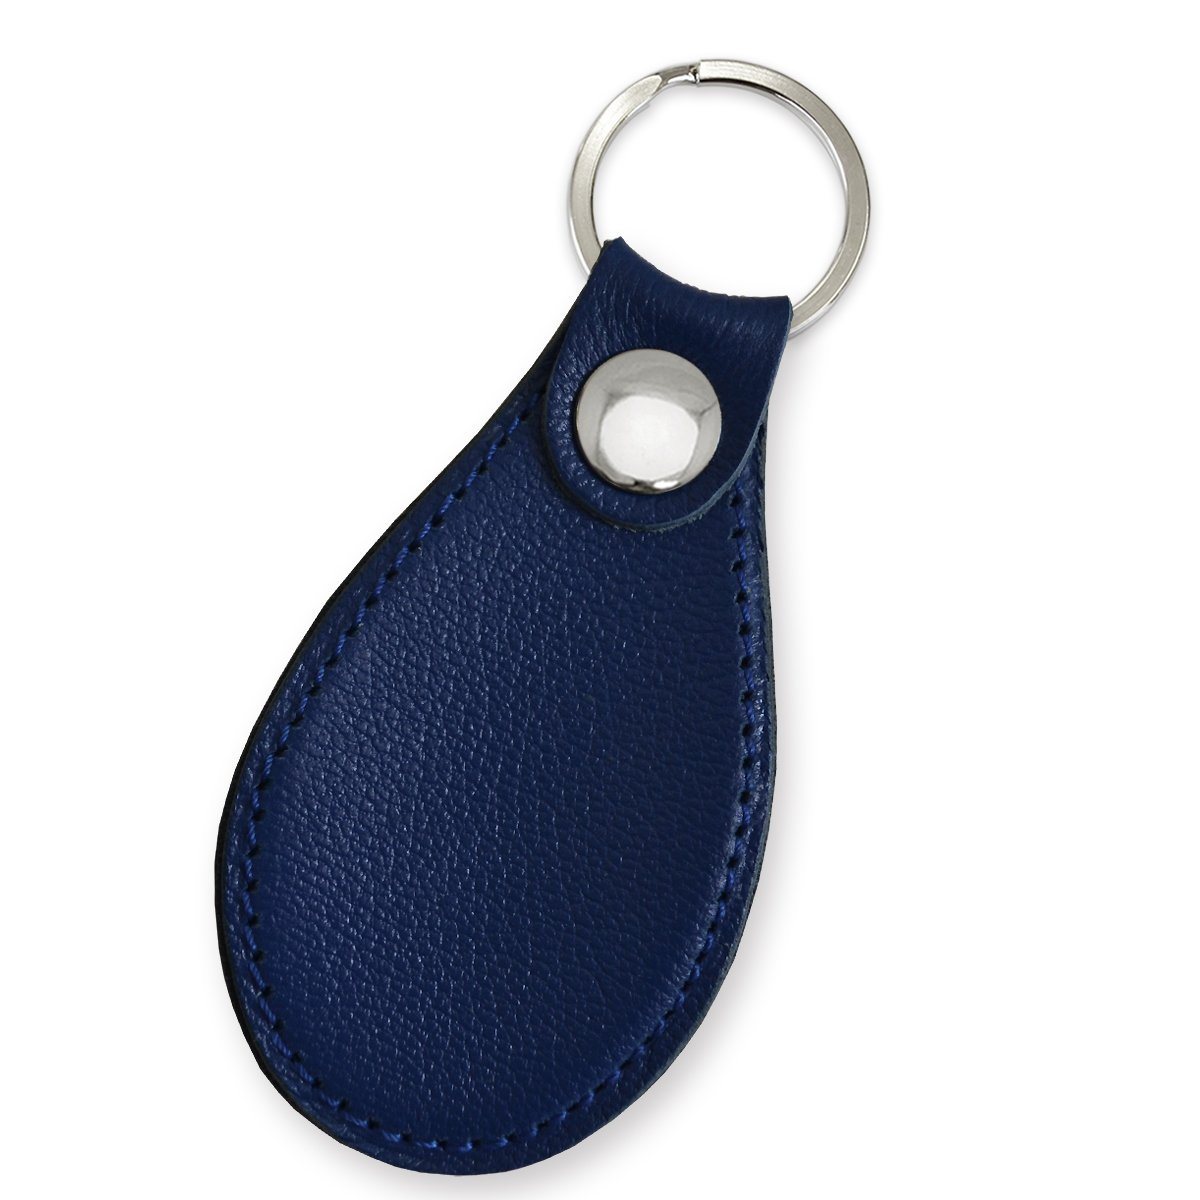 China Wholesale Leather Key Chain with Metal Ring